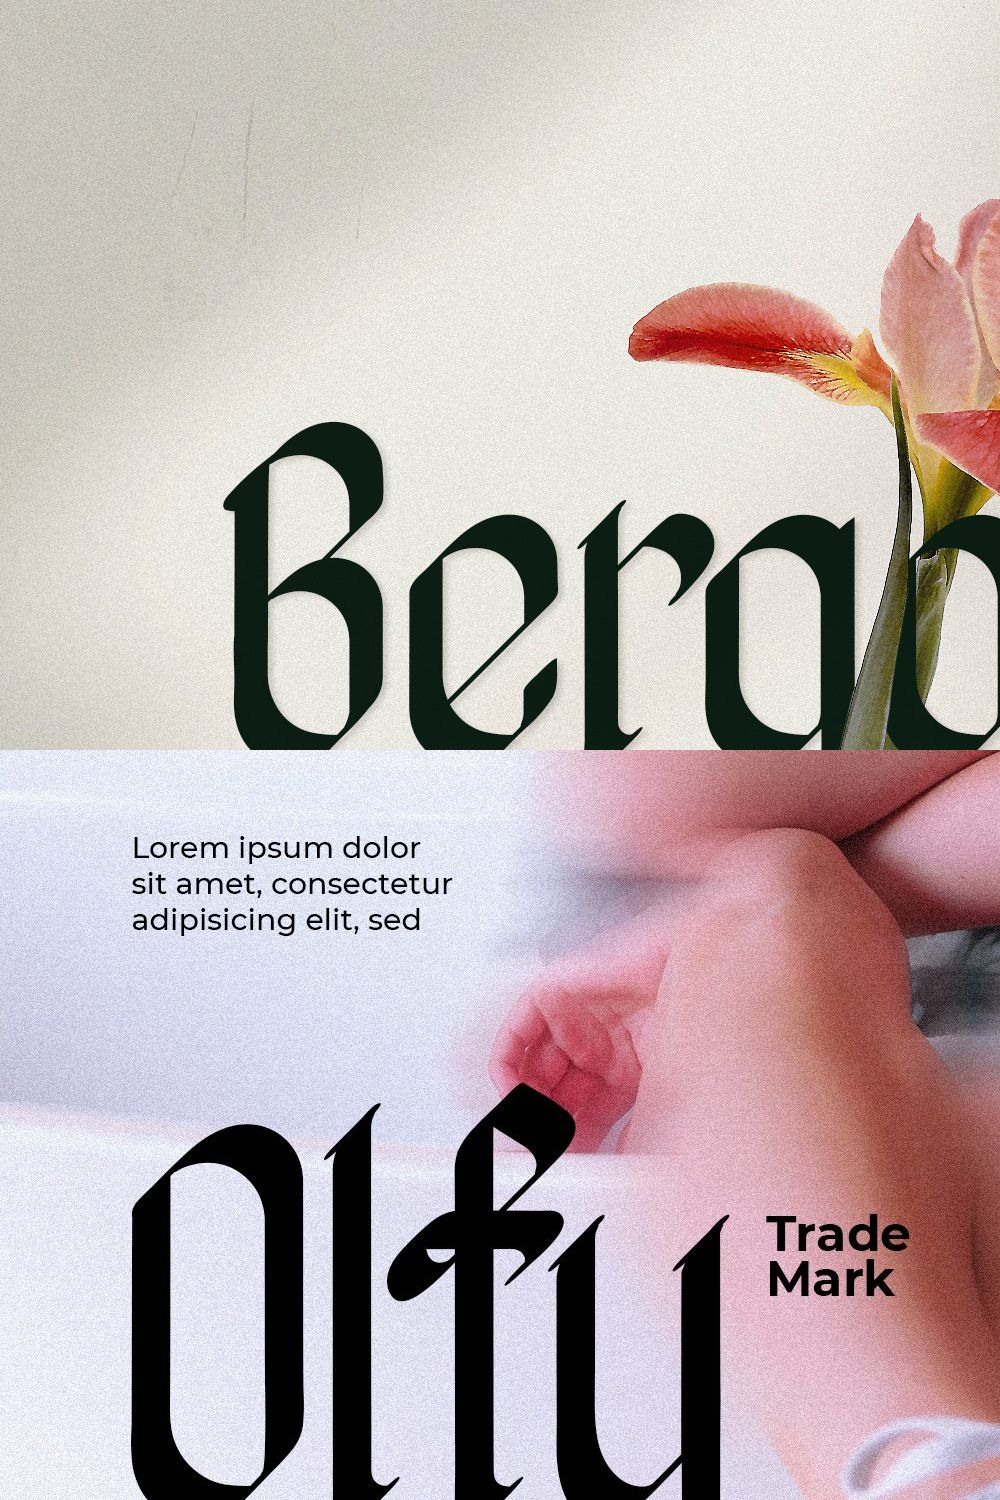 Bergolost Display Typeface pinterest preview image.